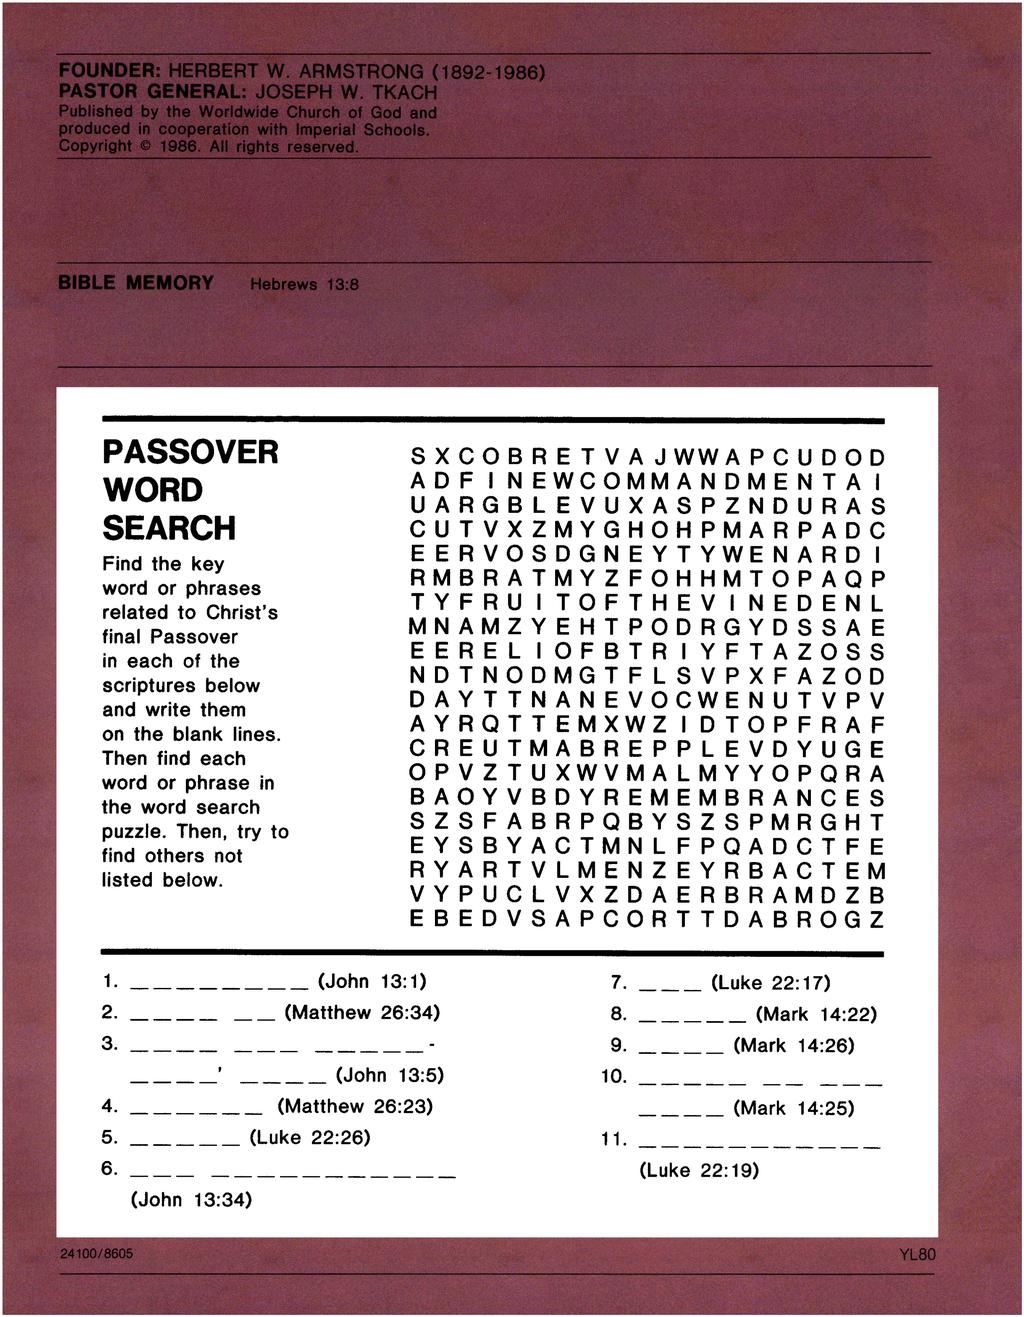 PASSOVER WORD SEARCH Find the key word or phrases related to Christ's final Passover in each of the scriptures below and write them on the blank lines.